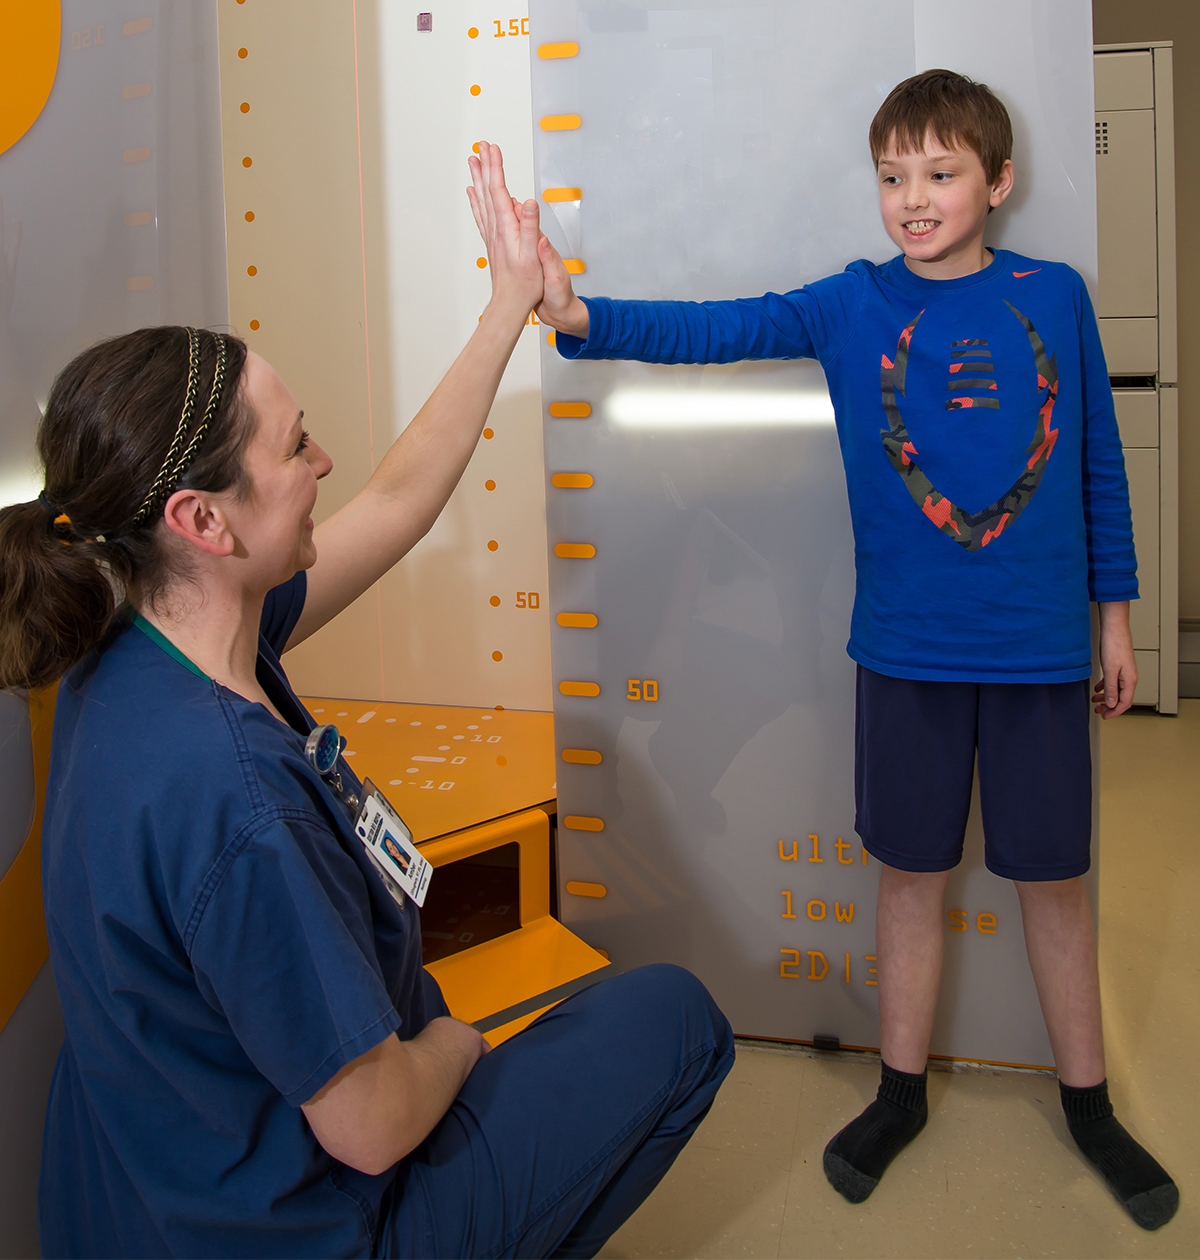 Radiology nurse high-fiving patient after X-rays were taken at Texas Scottish Rite Hospital for Children